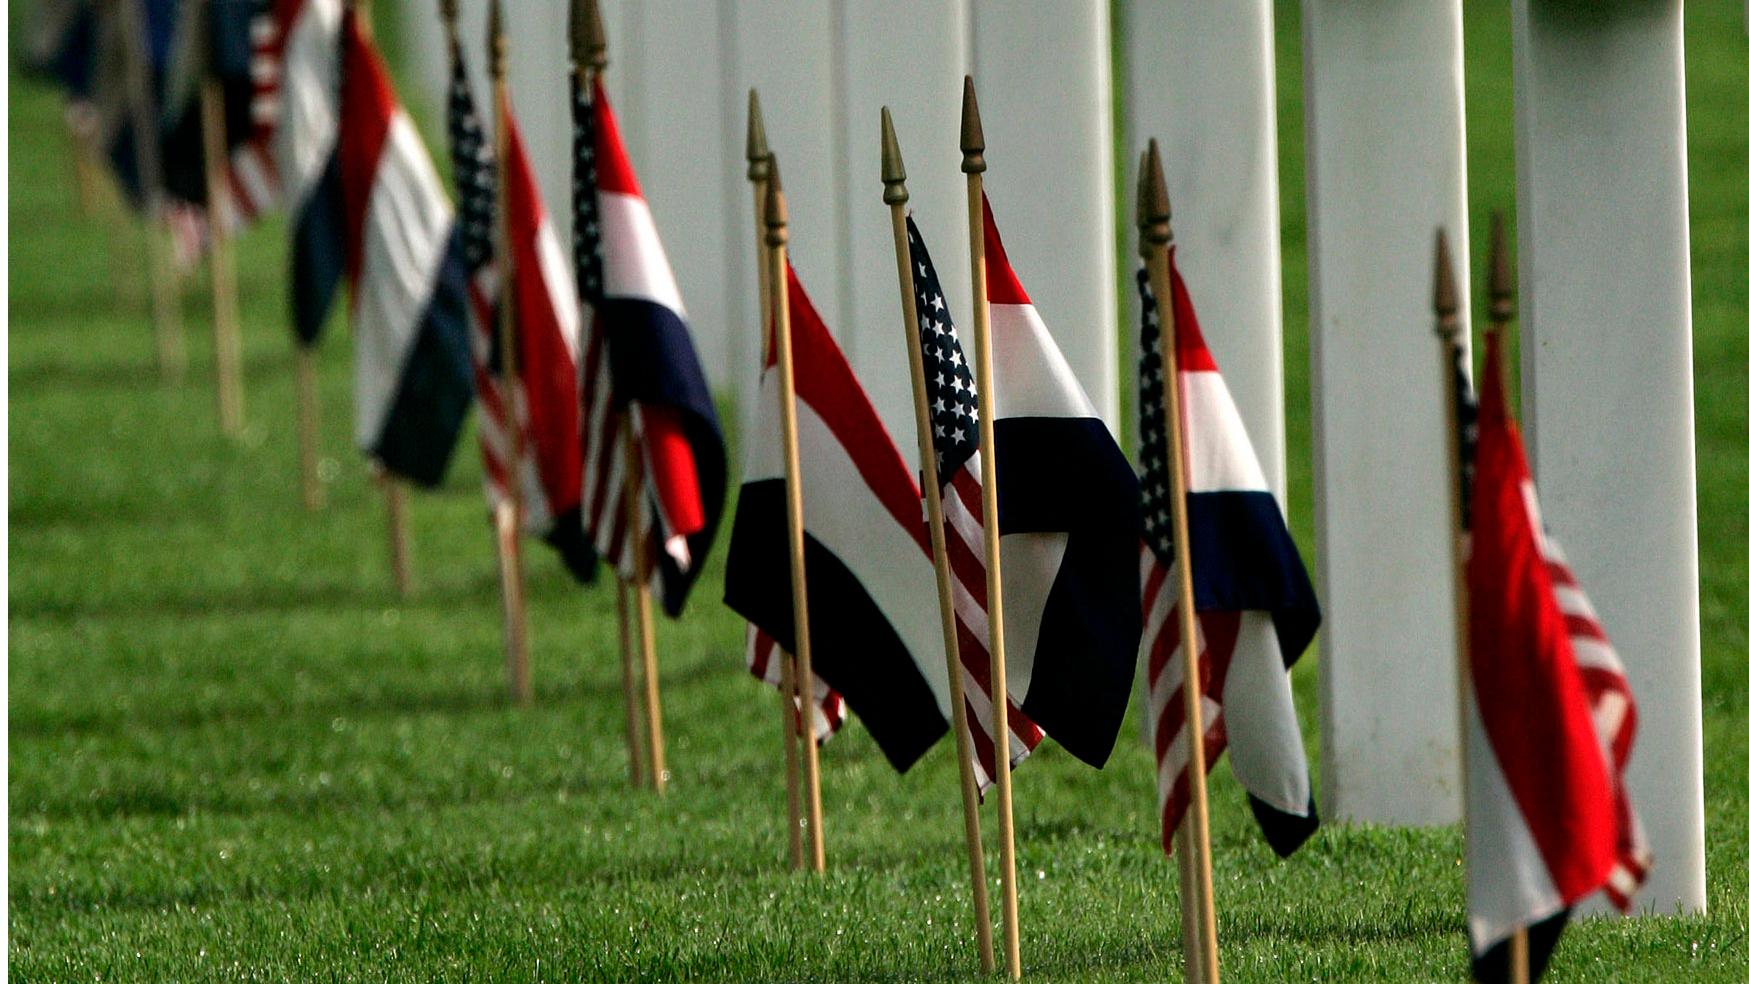 Dutch and U.S. flags decorate the graves at the American Cemetery and Memorial in Margraten.